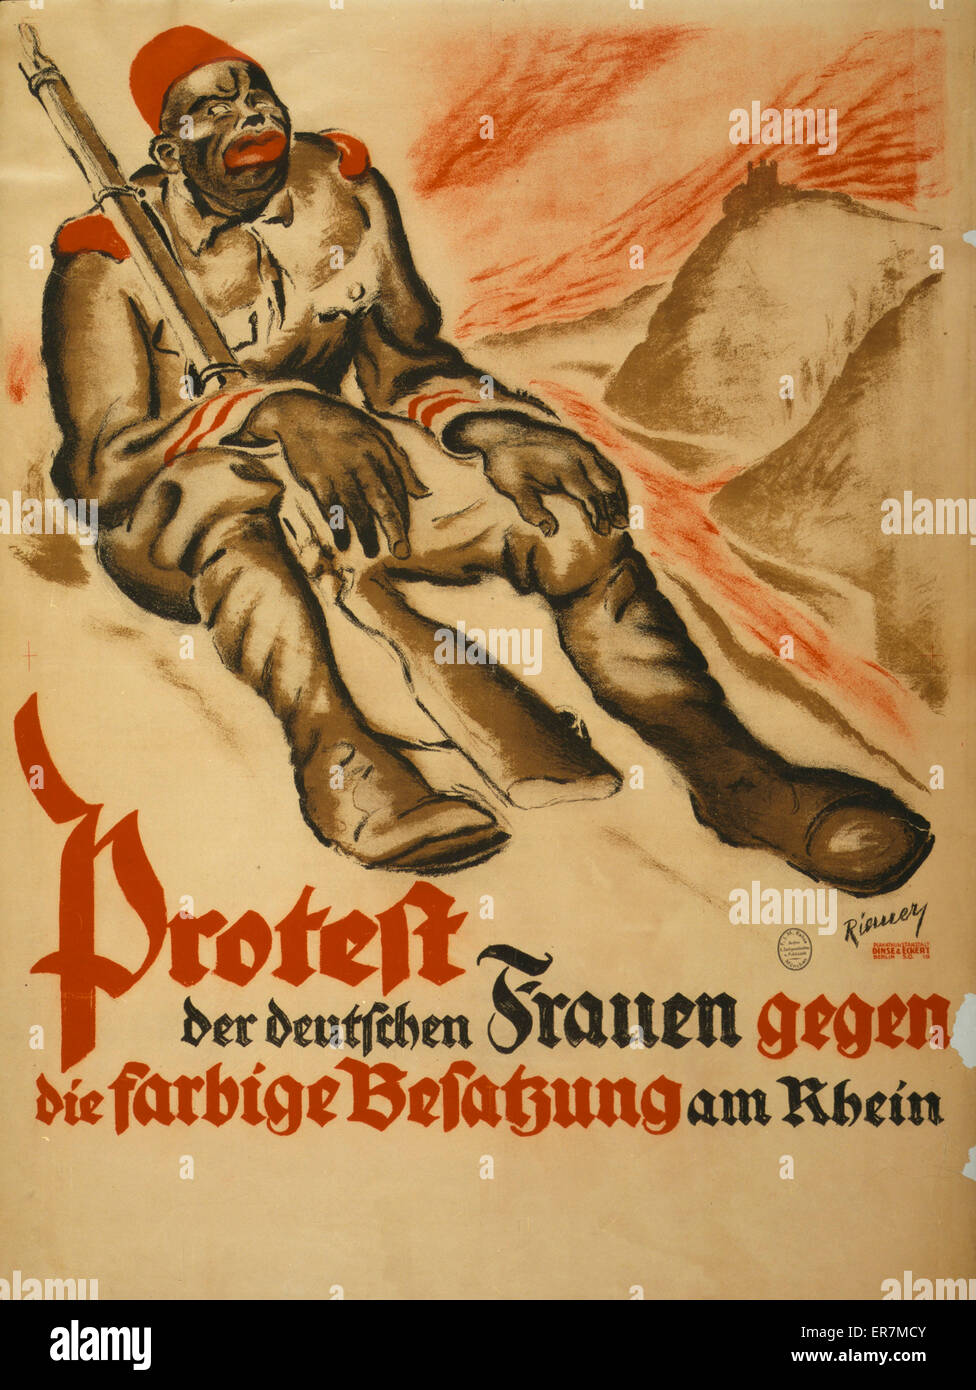 Protest der deutschen Frauen gegen die farbige Besatzung am Rhein. Poster shows a African soldier seated on the one French side of the Rhine River; on the opposite side is a castle on a cliff. Text: German women protest the colored occupation of the Rhine Stock Photo